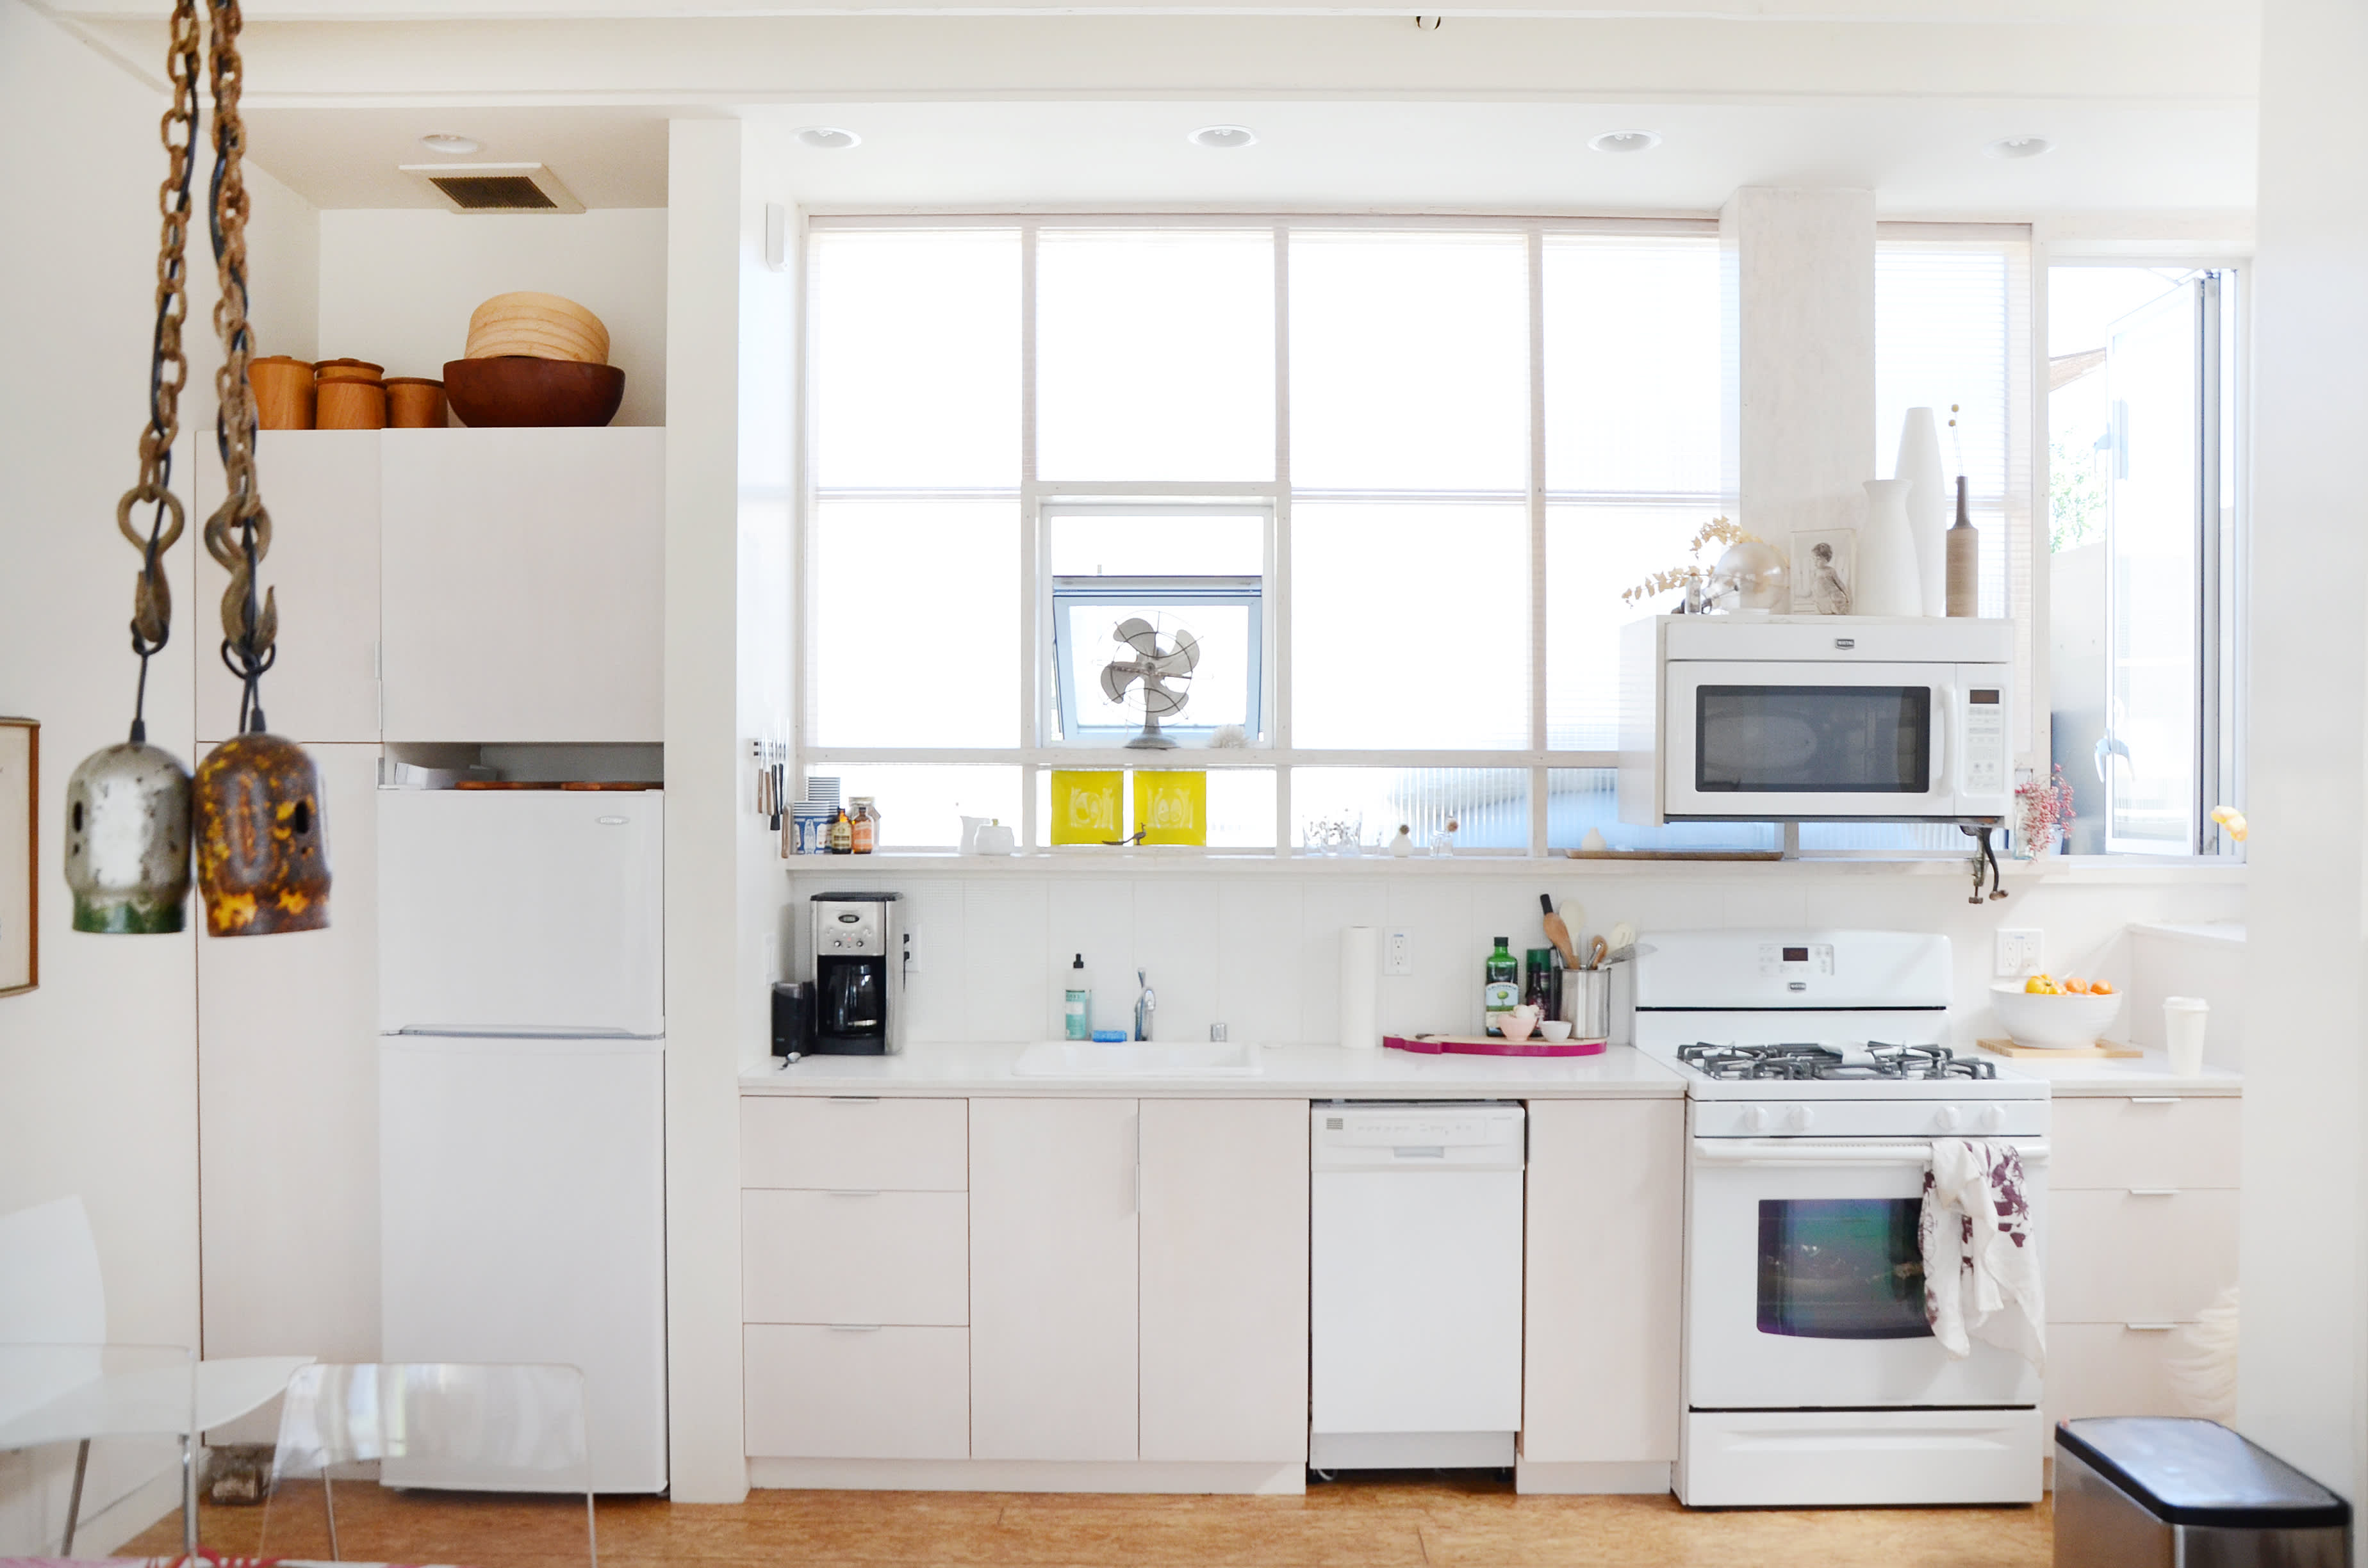 All About: Drawer Dishwashers